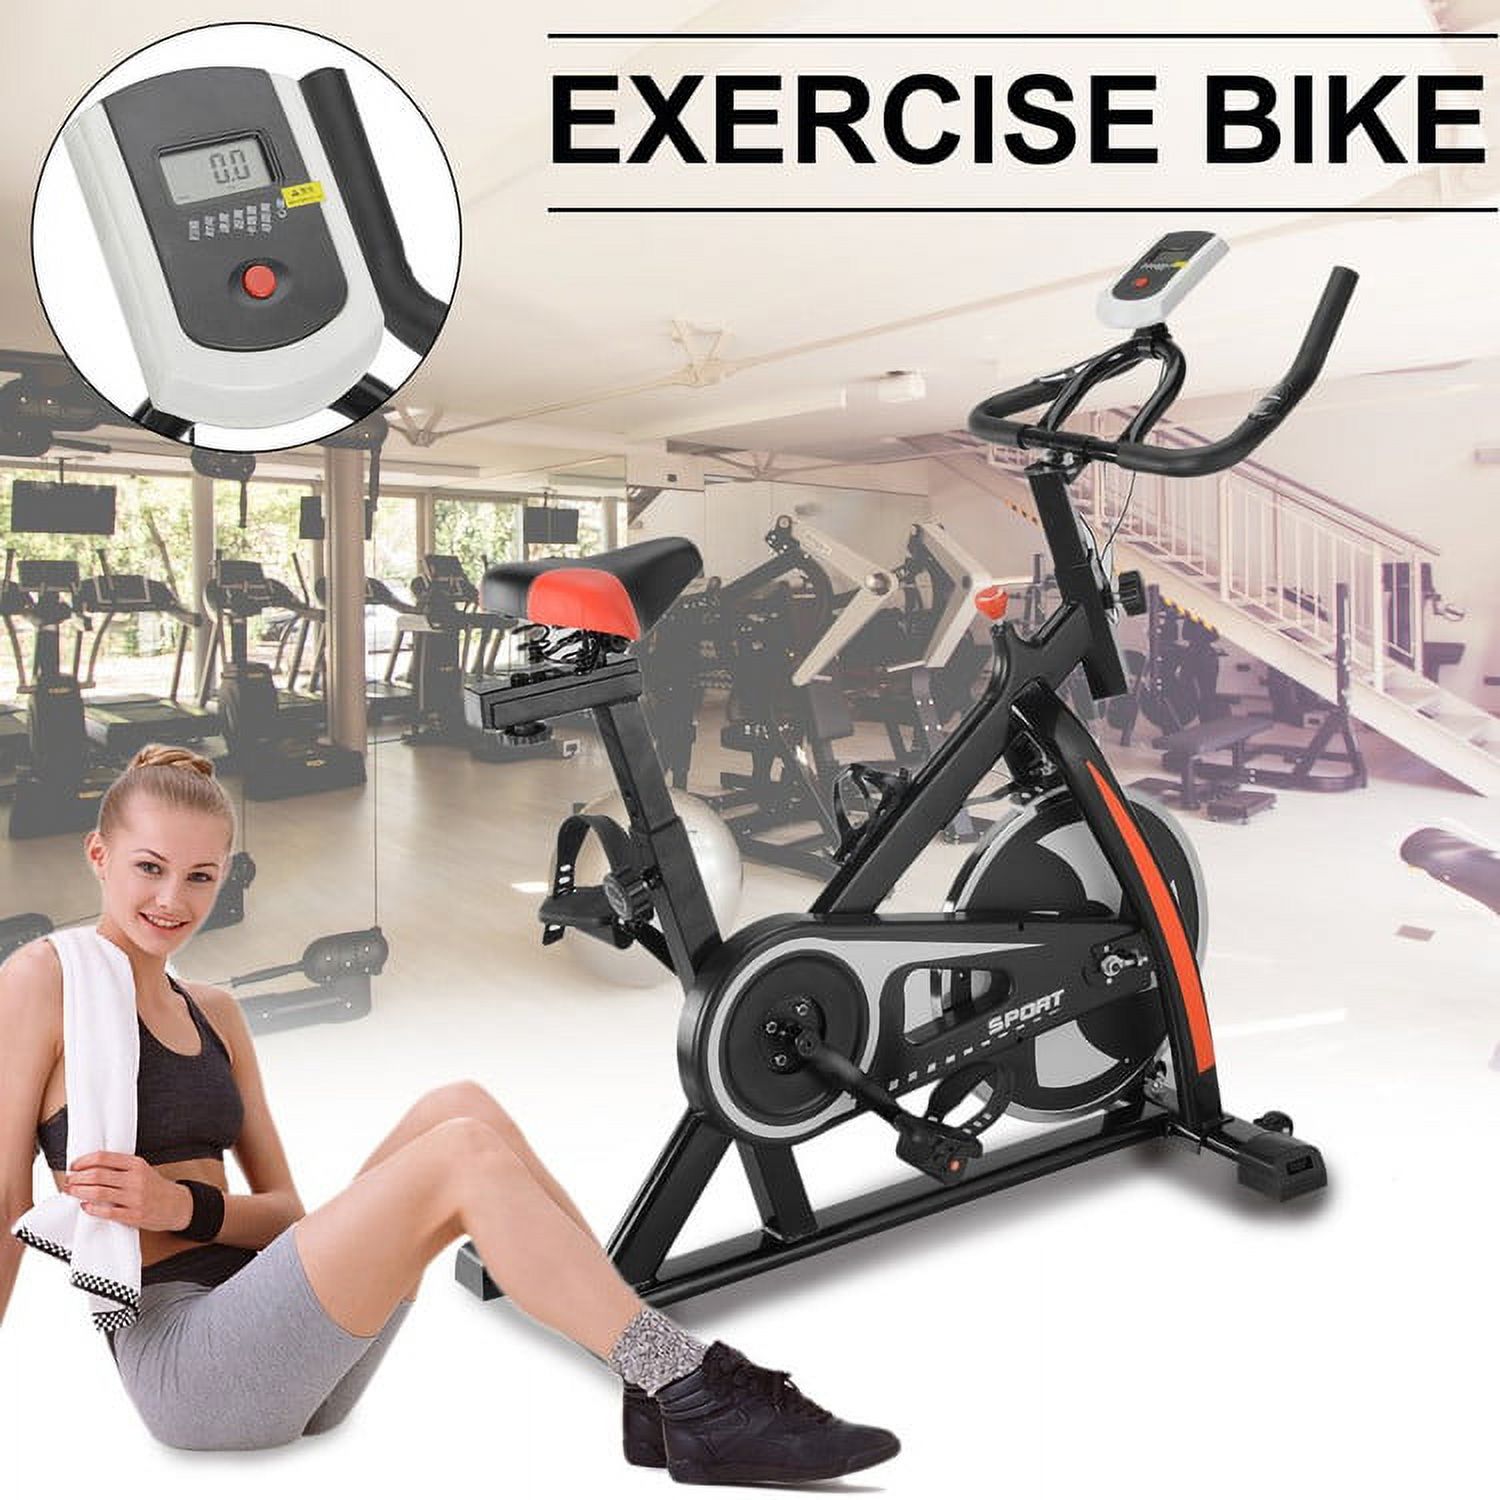 Indoor Cycling Trainer Exercise Bike Cycling Twisting Mini Exercise Bike Equipment (Black) - image 2 of 4